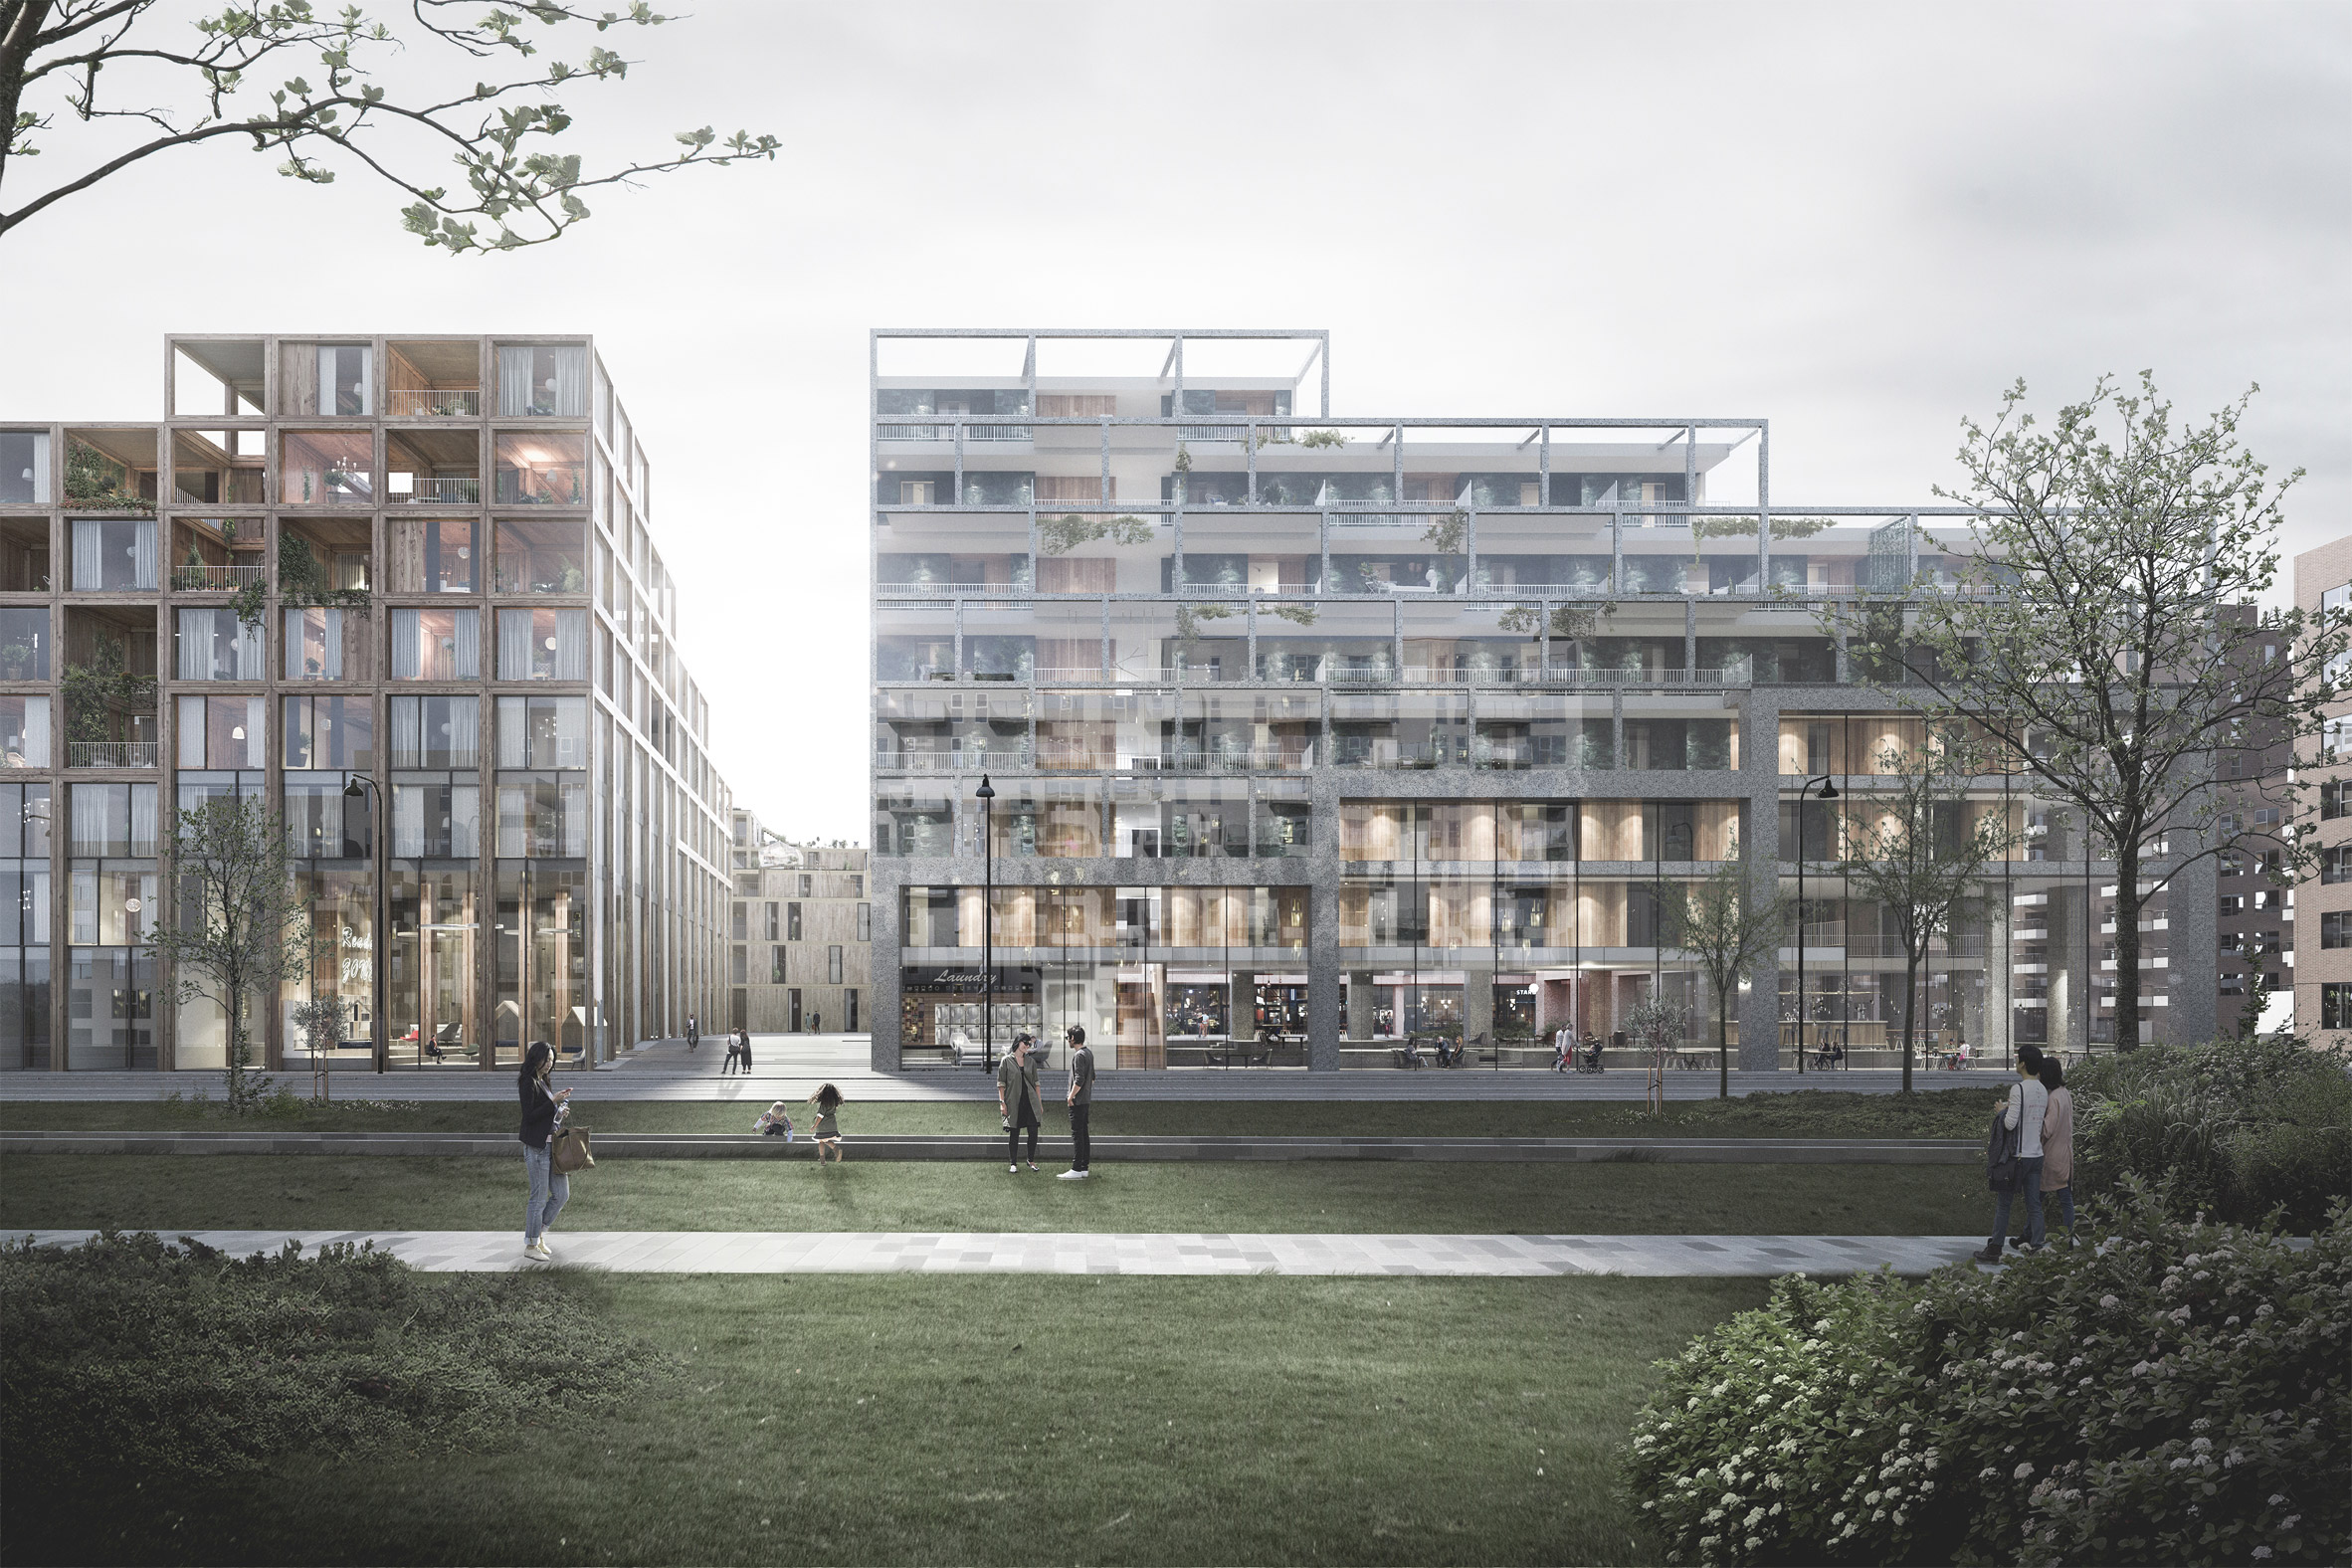 UN17 Village to be built in Copenhagen with recycled materials